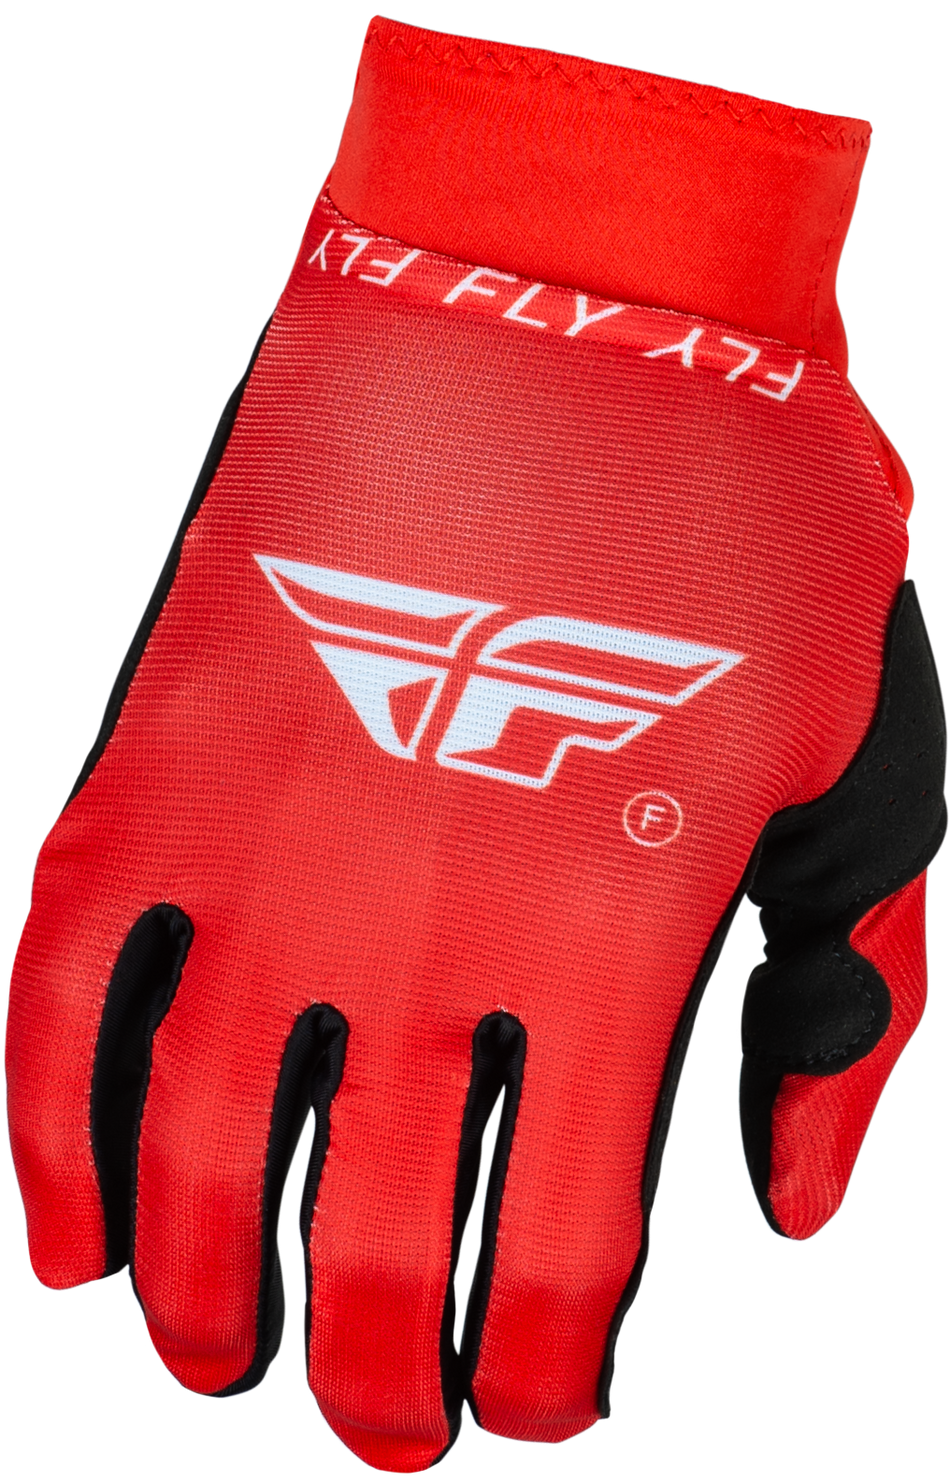 FLY RACING Pro Lite Gloves Red/White Xs 377-044XS